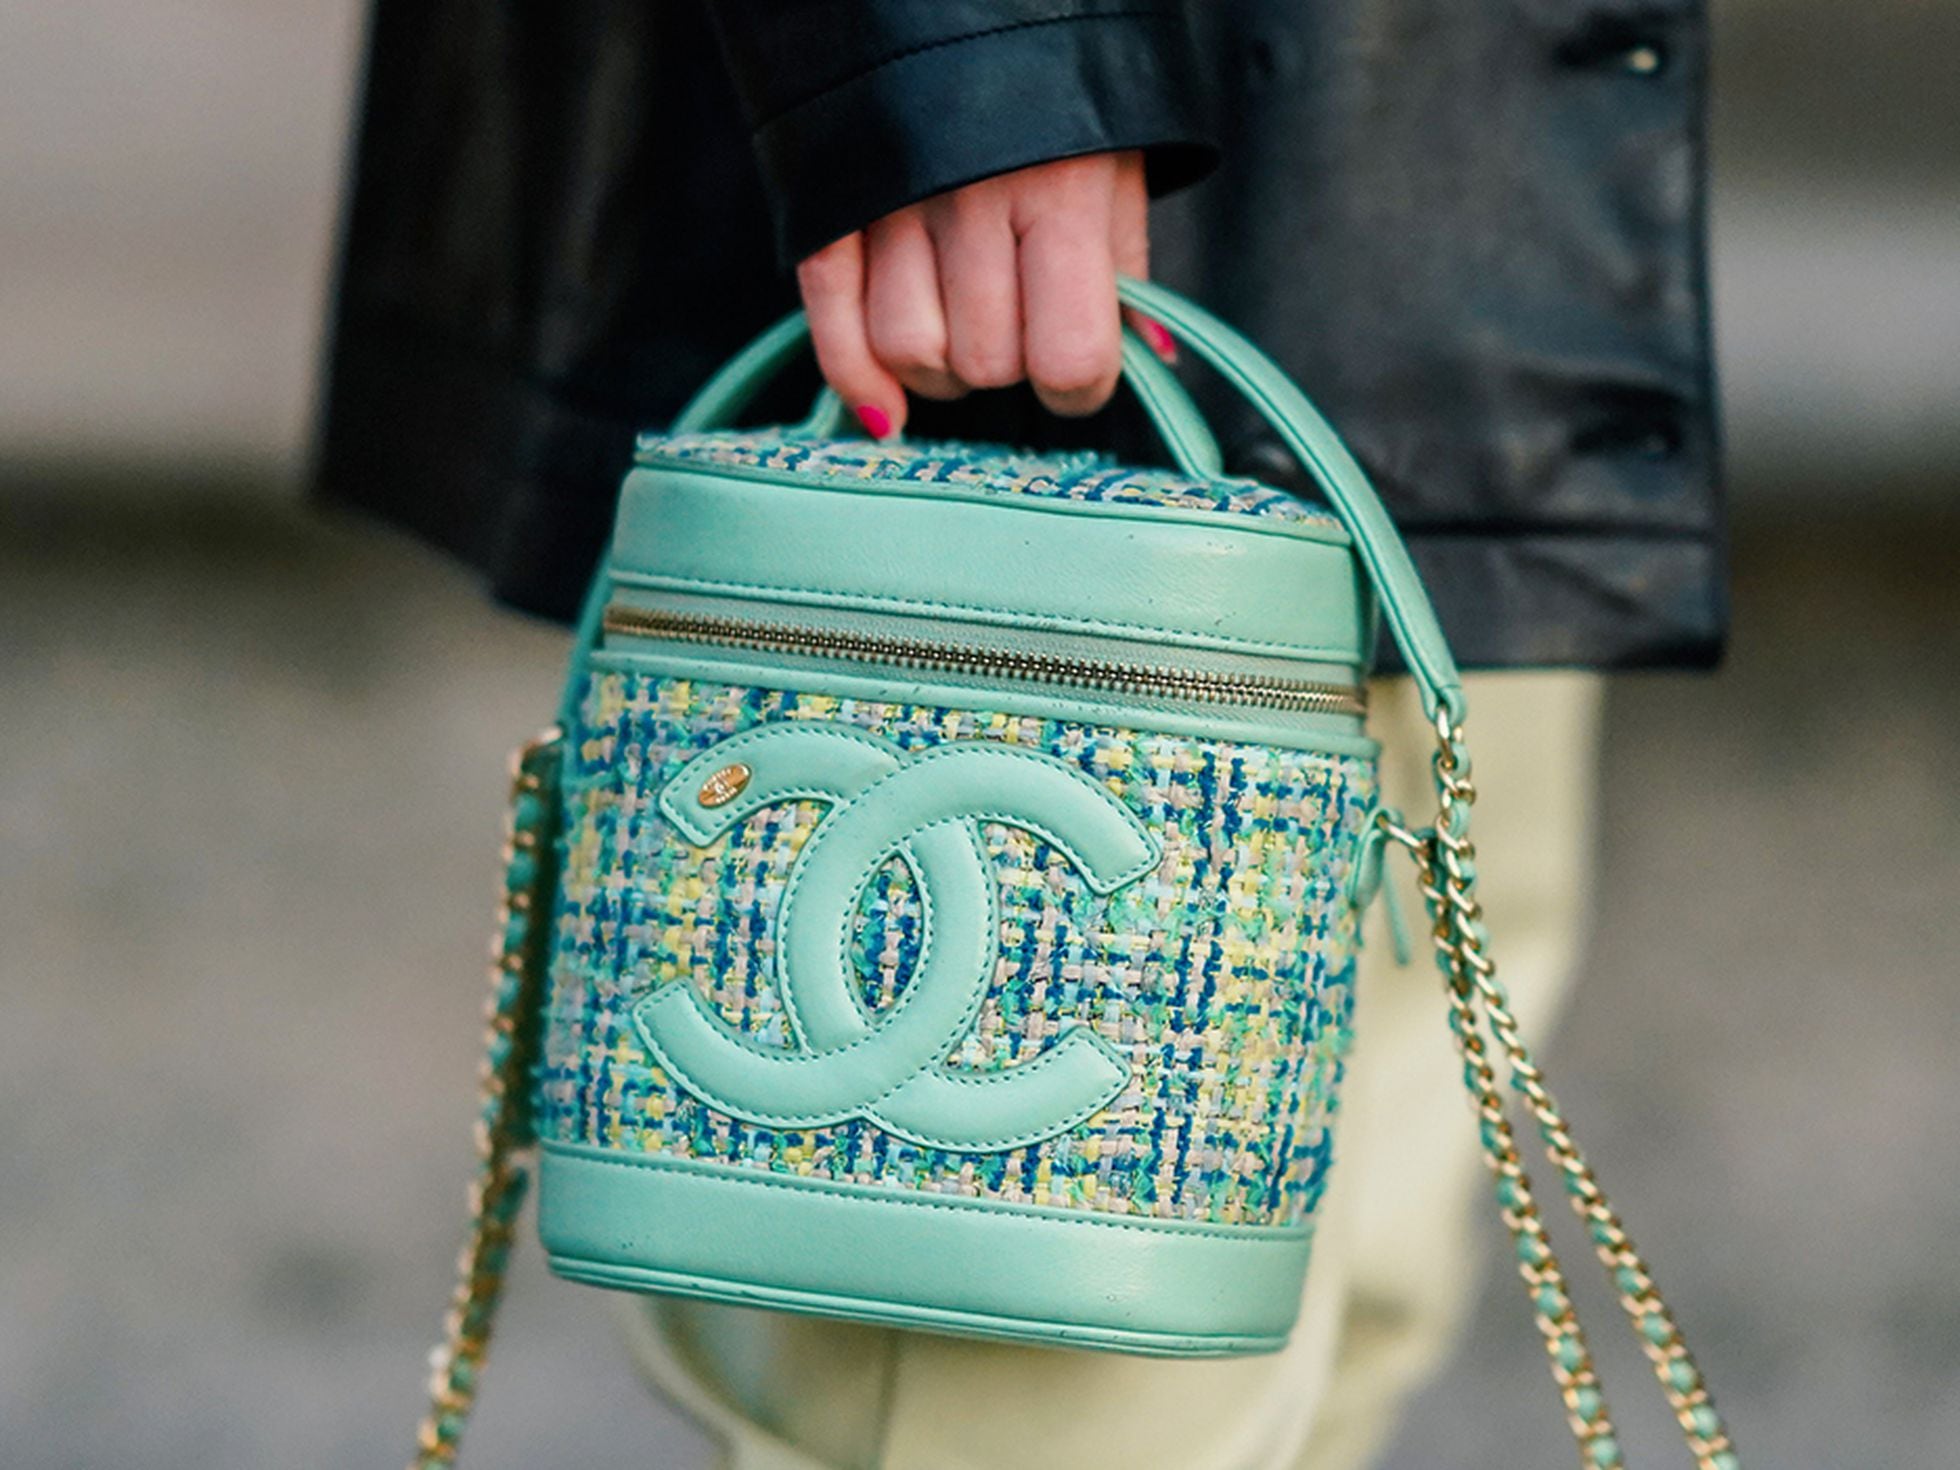 How to tell a 'superfake' handbag from the real deal, Lifestyle